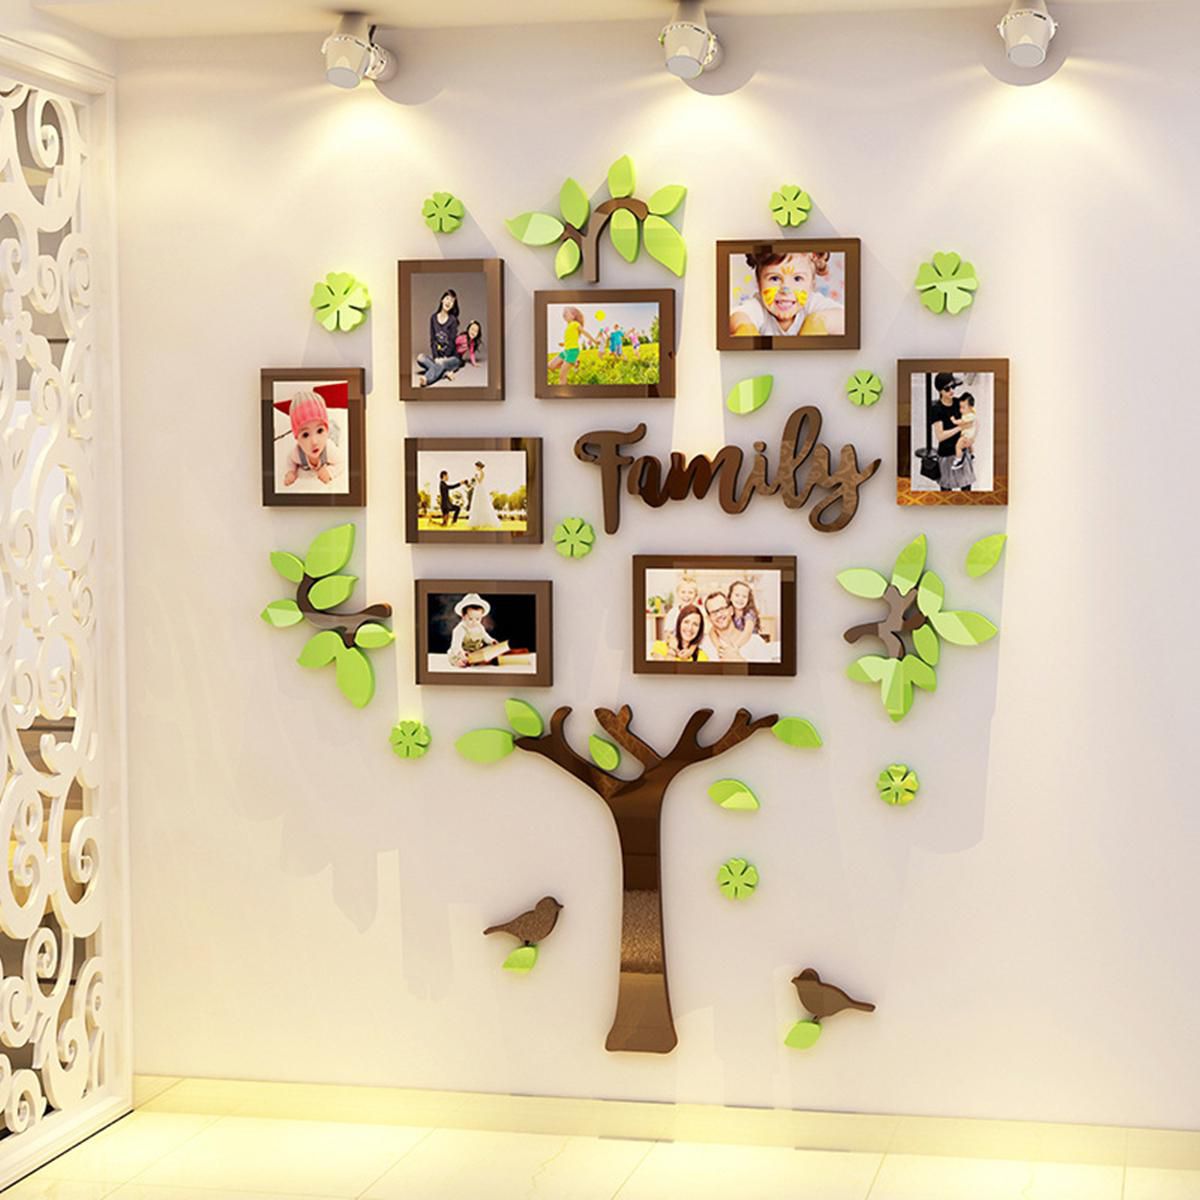 Download 3d Family Tree Pictures Photo Frame Wall Sticker Home Bedroom Decor Wedding New Buy 3d Family Tree Pictures Photo Frame Wall Sticker Home Bedroom Decor Wedding New Online At Low Price In